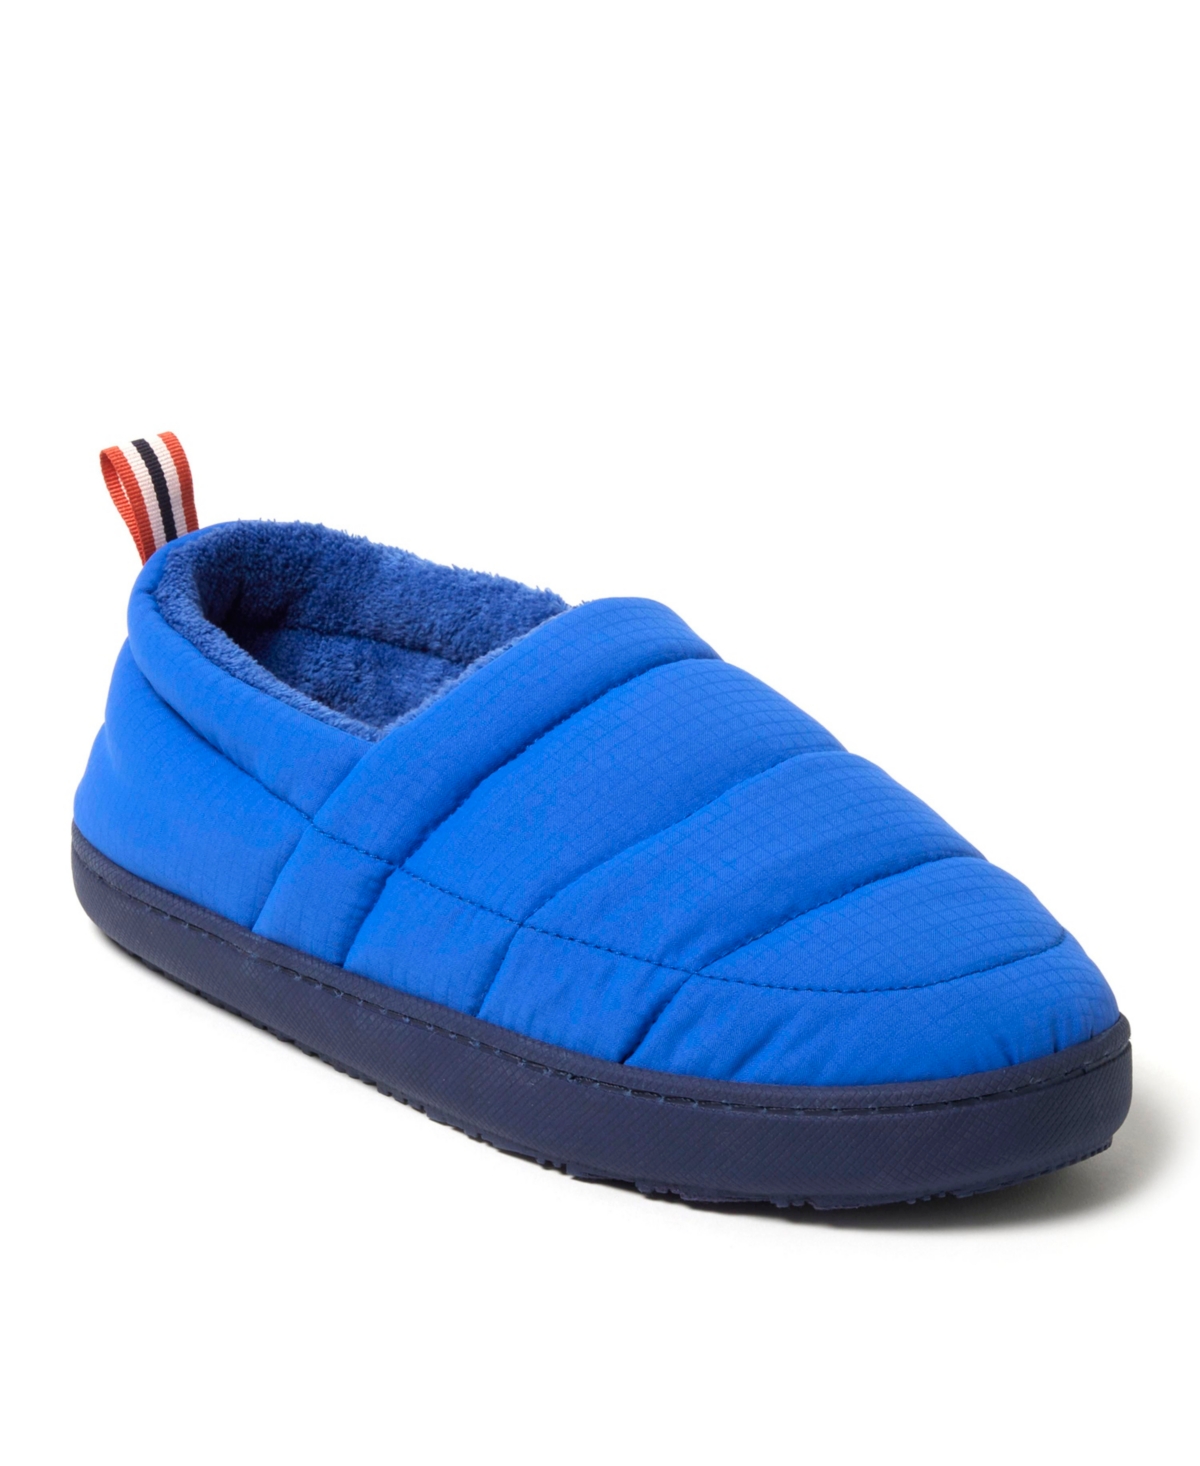 Men's Cullen Ripstop Closed Back Slip On - Olympic blue